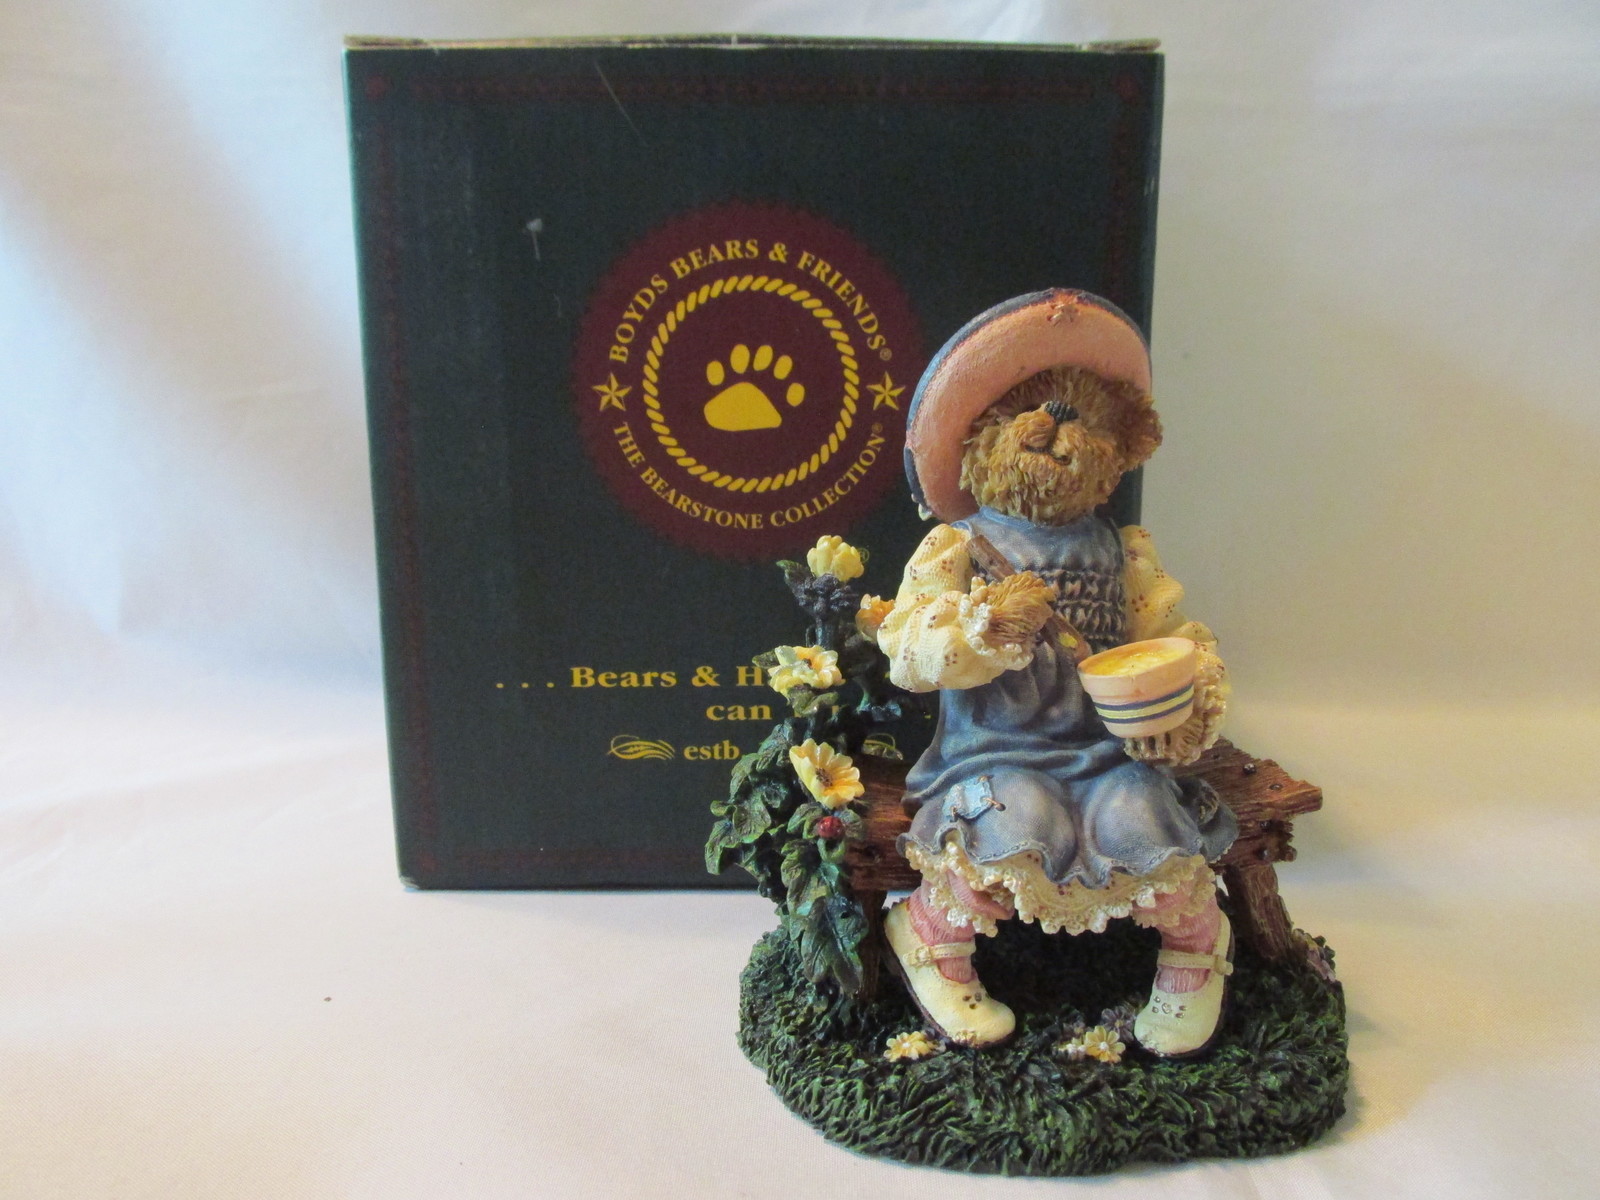 Boyds Bears "Lil' Miss Muffet...What's in the Bowl?" Classic Beary Tales #5 2001 - $17.99